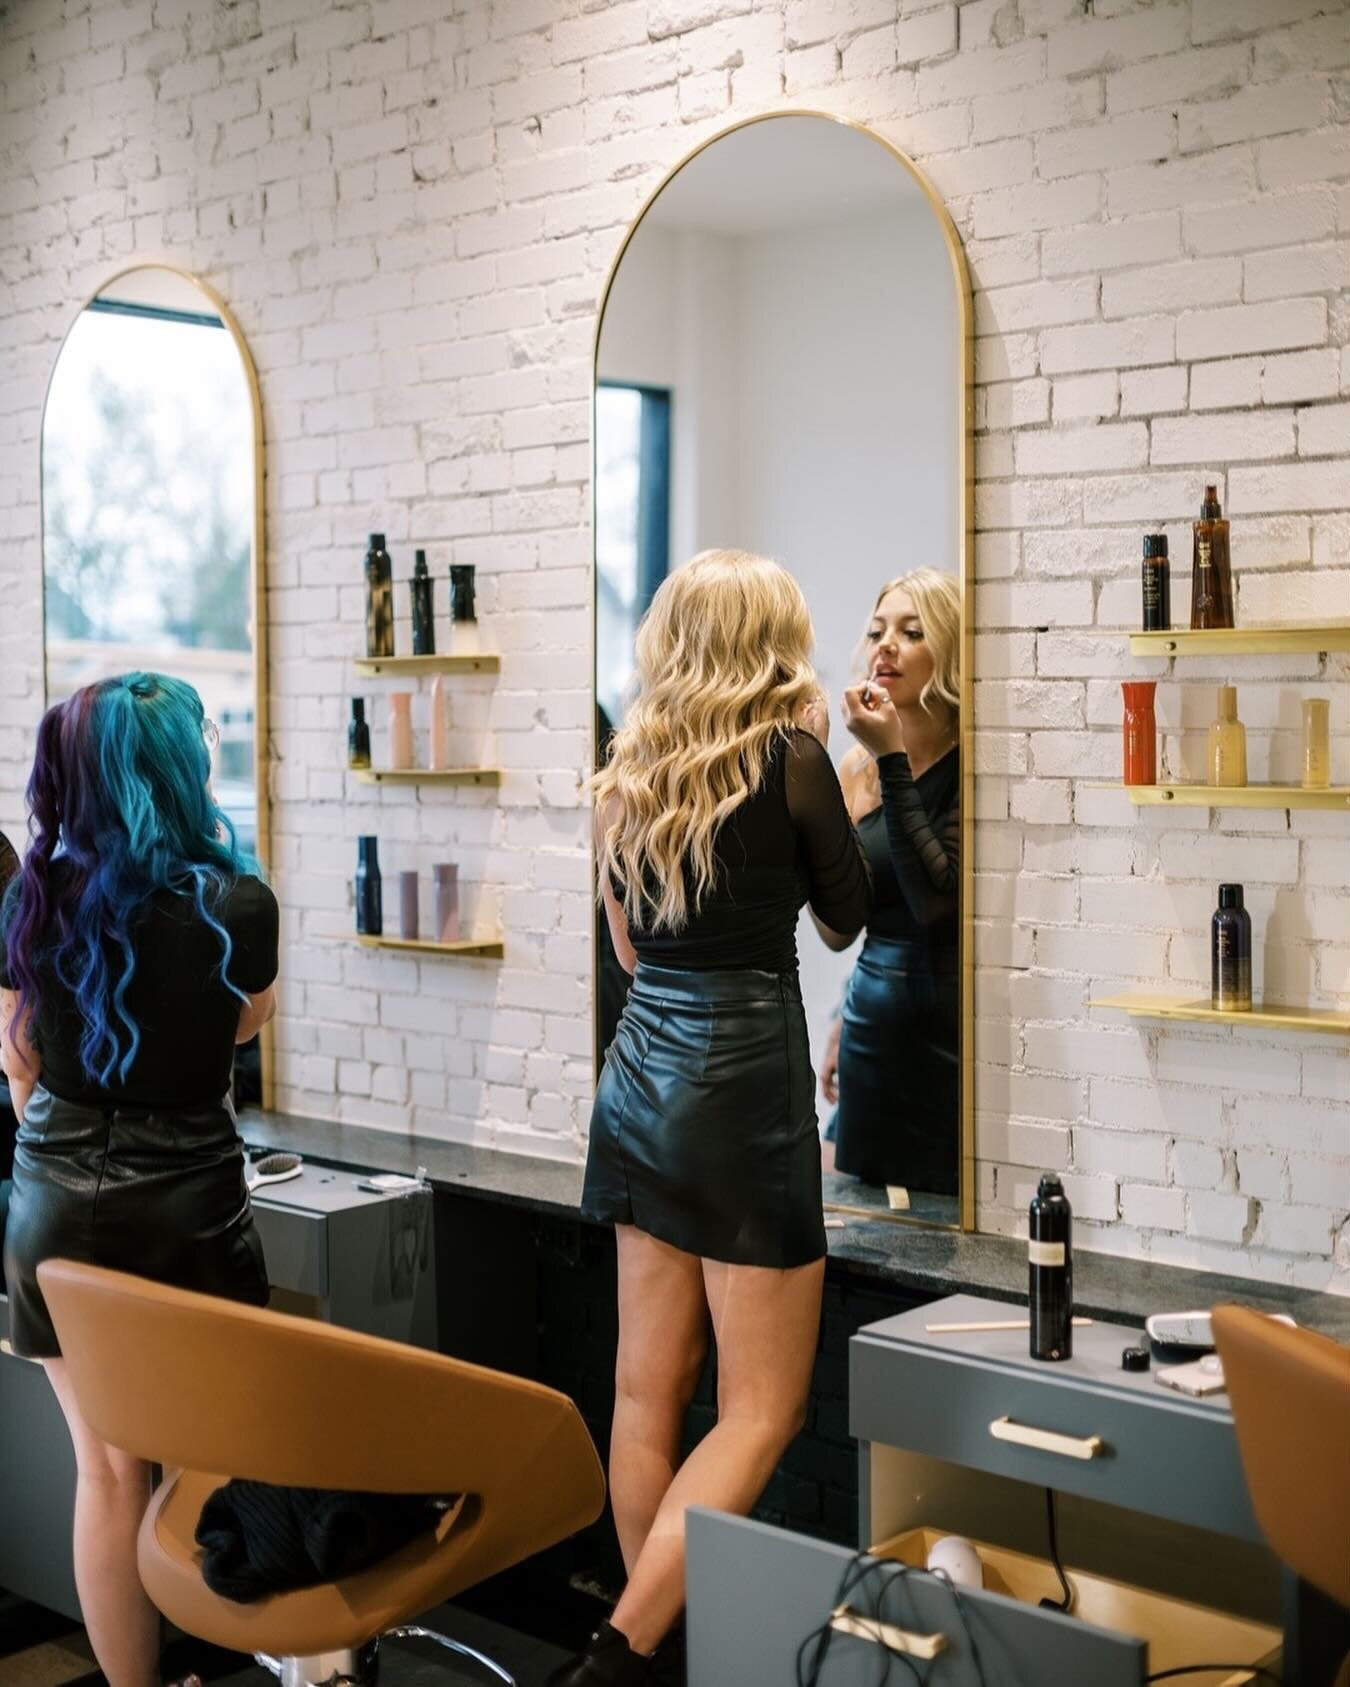 Have you ever wanted to be a hair extension QUEEN?
⠀⠀⠀⠀⠀⠀⠀⠀⠀
We&rsquo;re hiring new Extensionistas and we would love to chat with you! Click the link in our bio to see if we&rsquo;re a match.
⠀⠀⠀⠀⠀⠀⠀⠀⠀
#coloradohairextensions #hairextensionspecialist